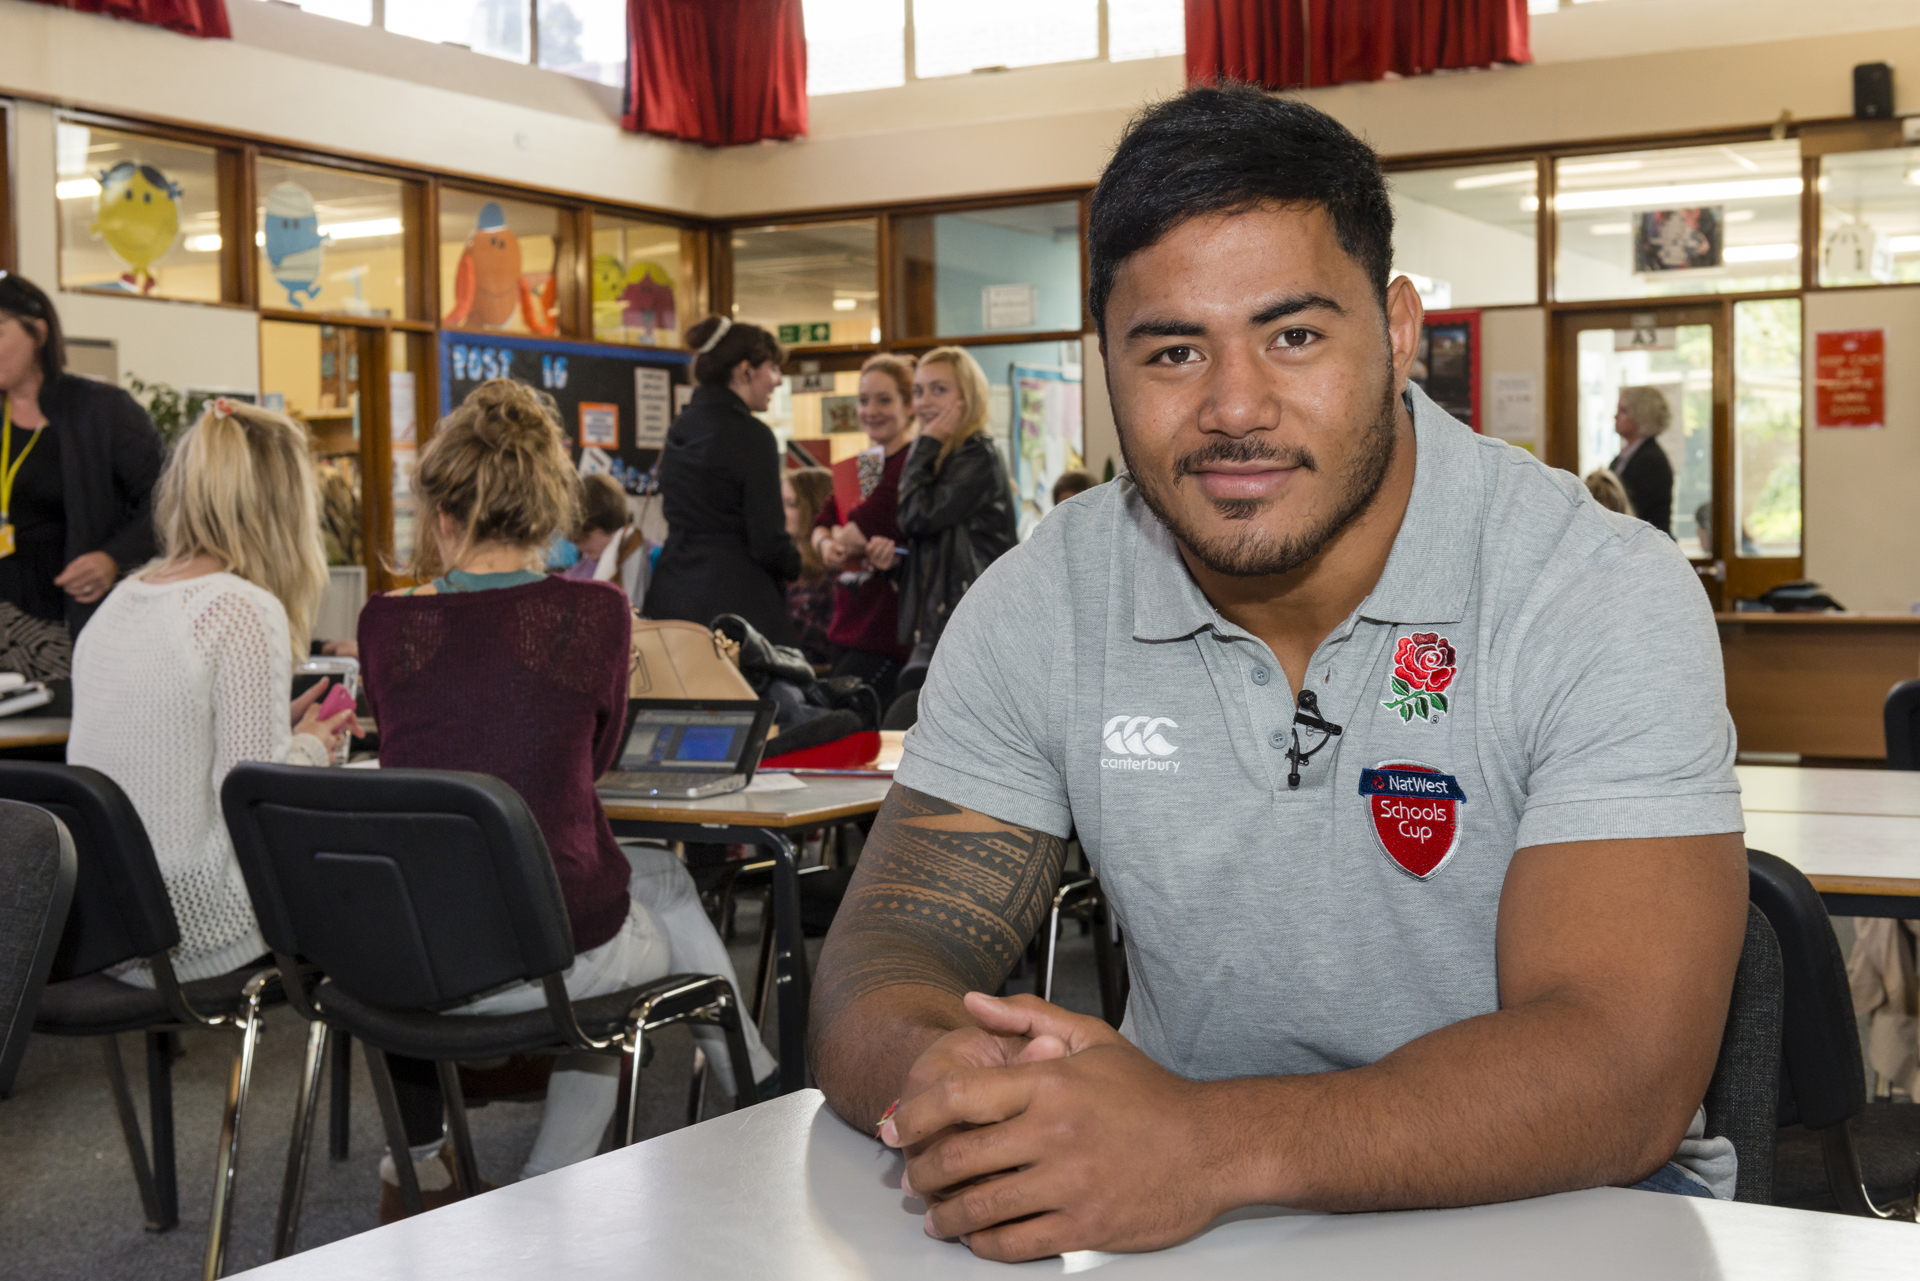 Leicester Tigers and Lions rugby ace Manu Tuilagi visits his old school to inspire a new generation of rugby players.  